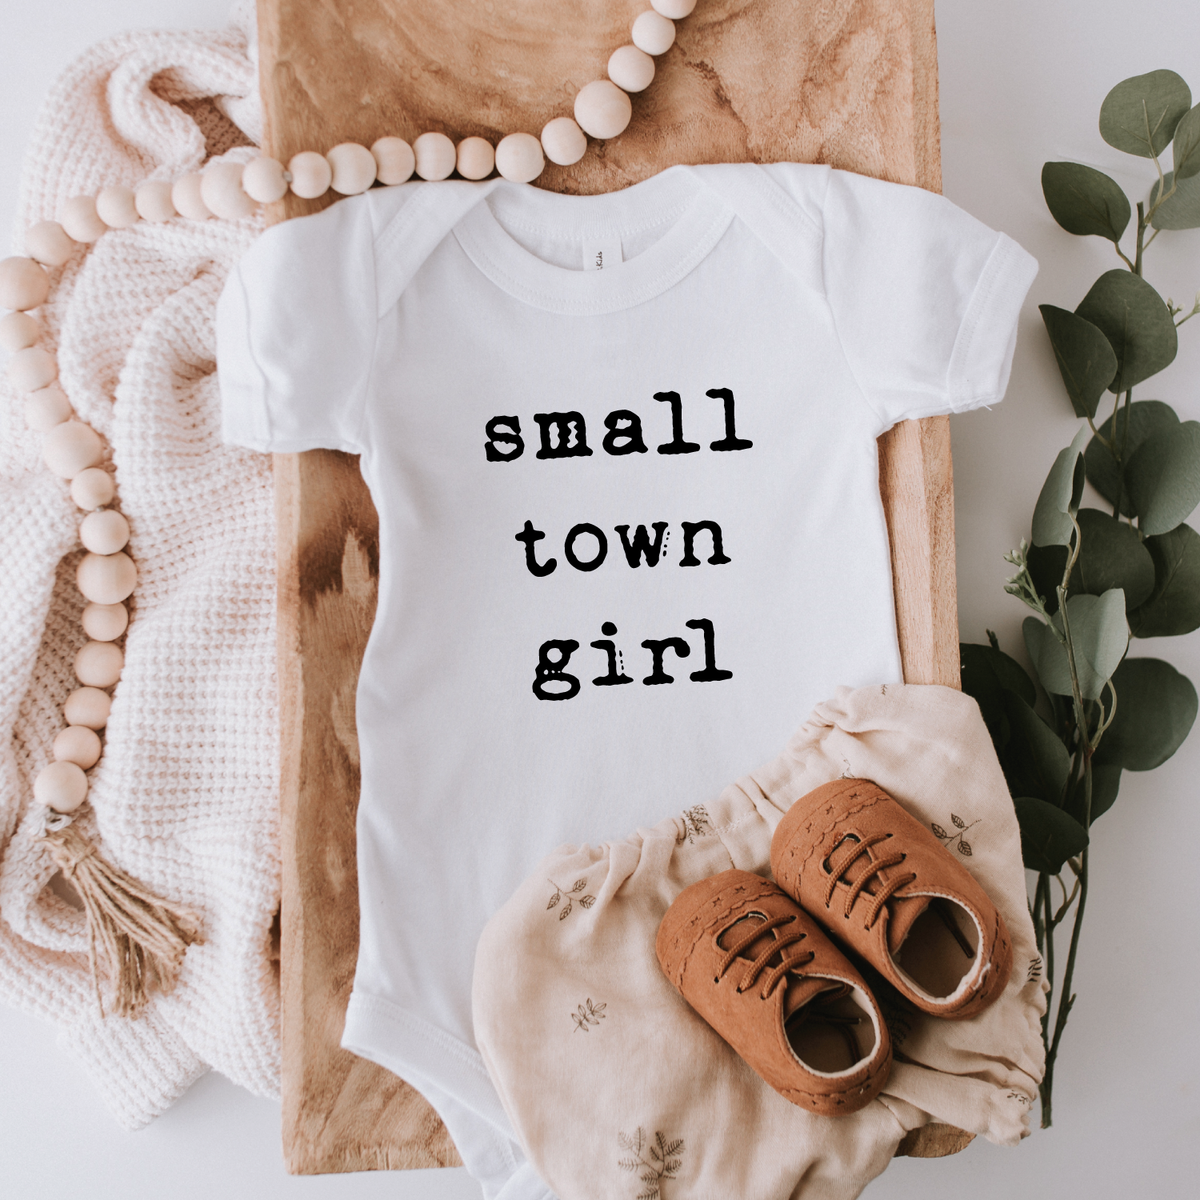 Small town girl onesie